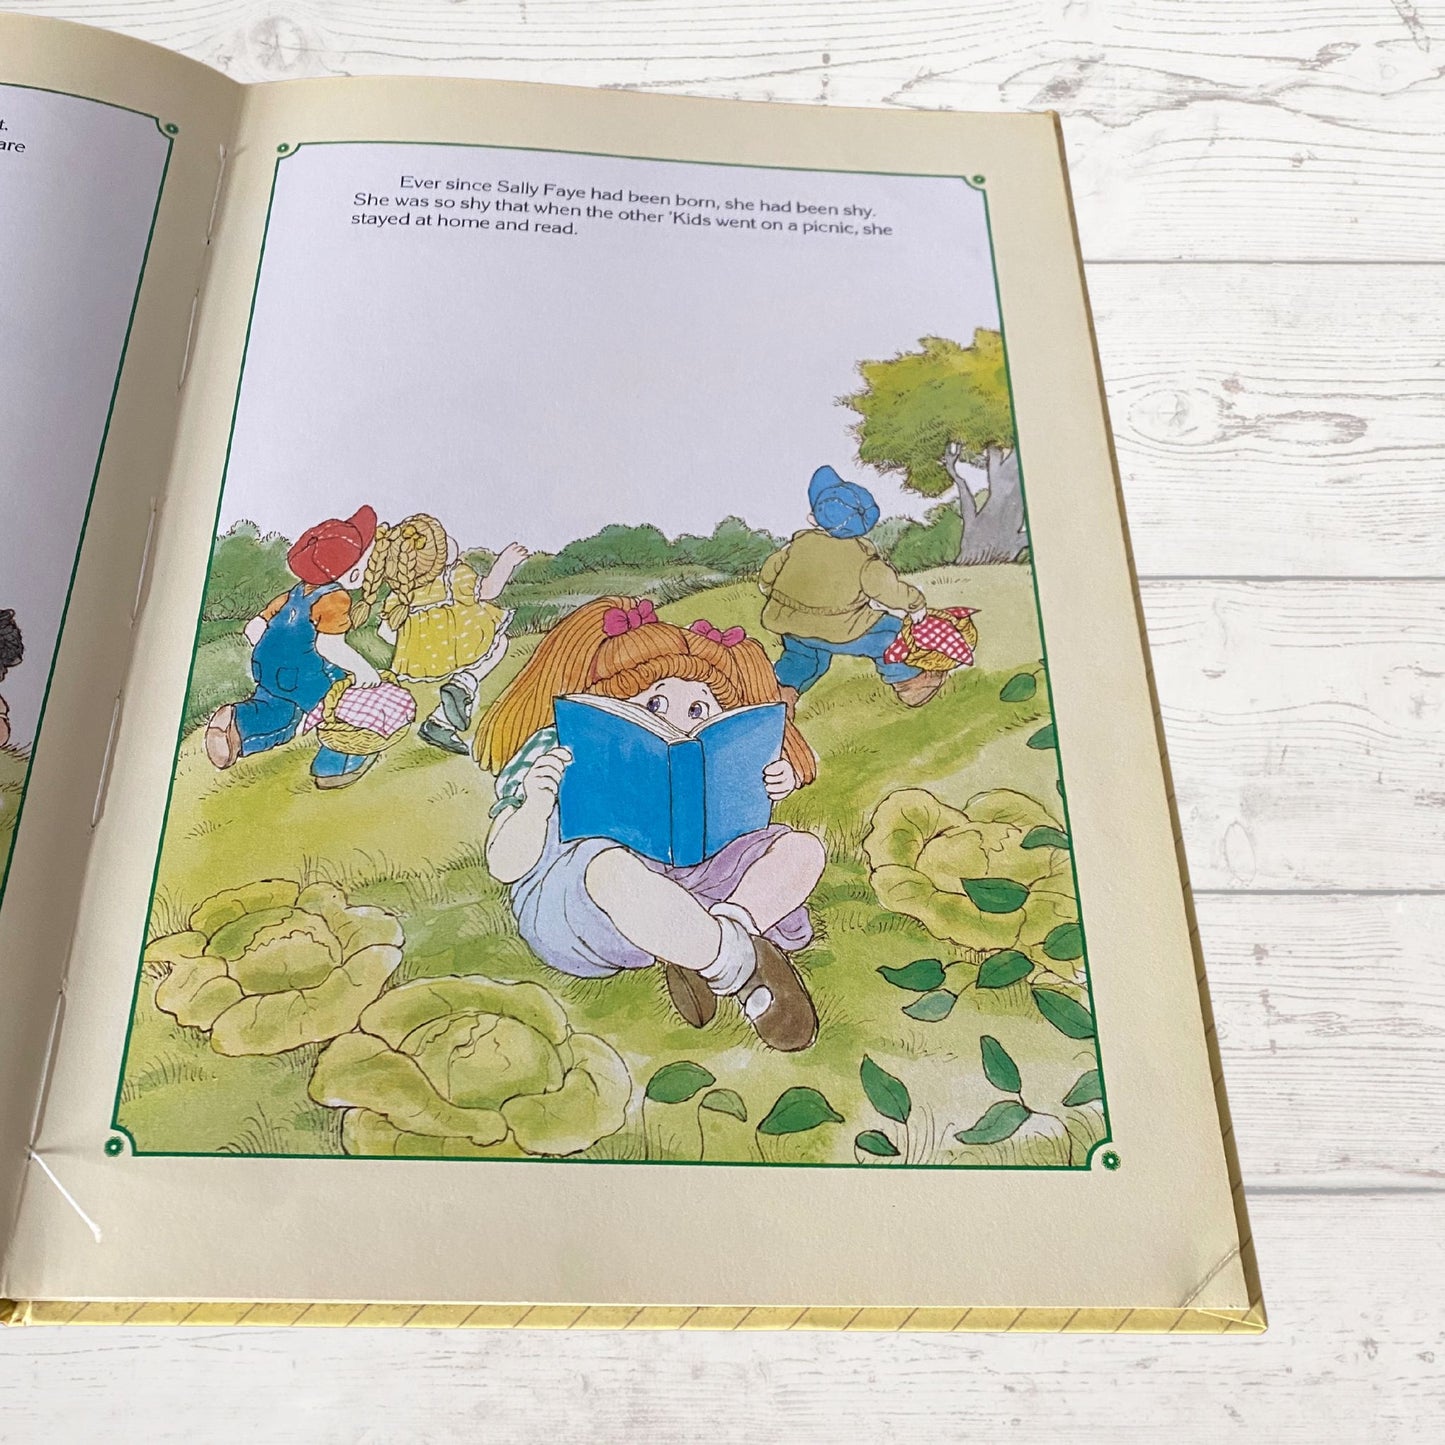 Cabbage Patch kids 1984 book. The Shyest Kid in the Patch .Great gift idea